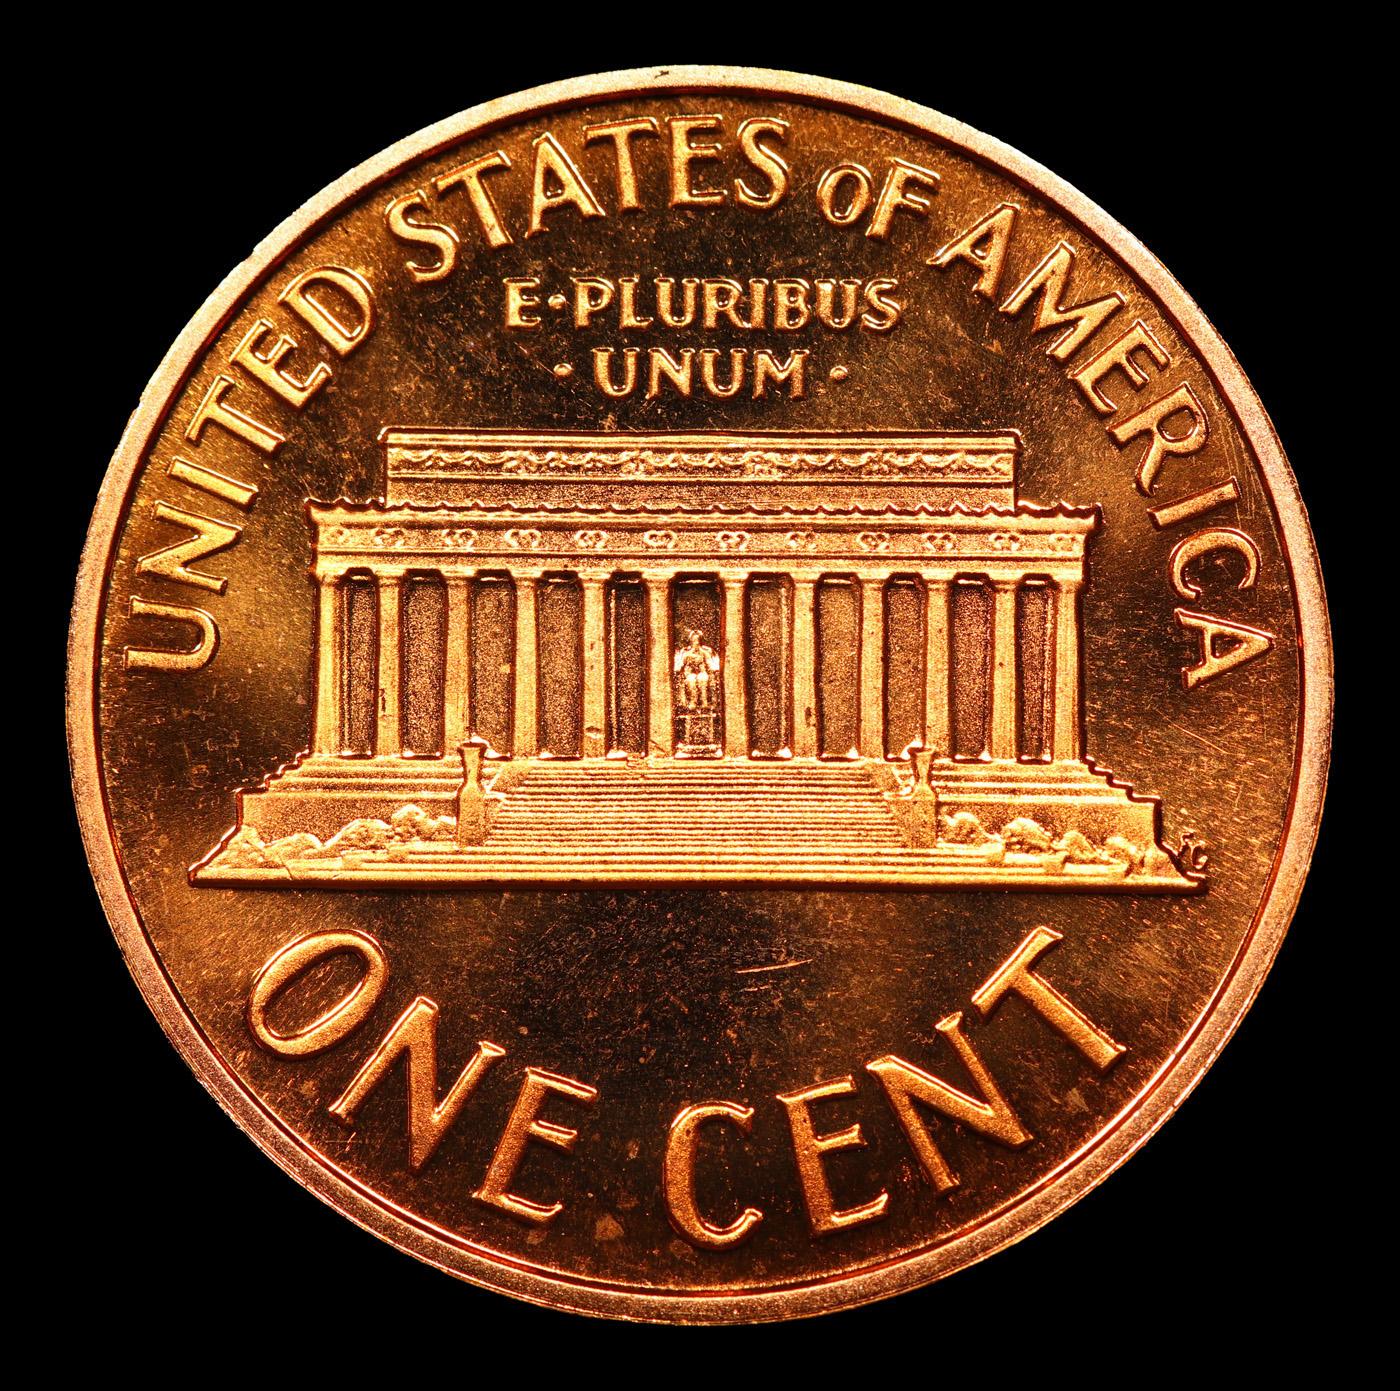 Proof 1963 Lincoln Cent TOP POP! 1c Graded pr69 rd CAM BY SEGS